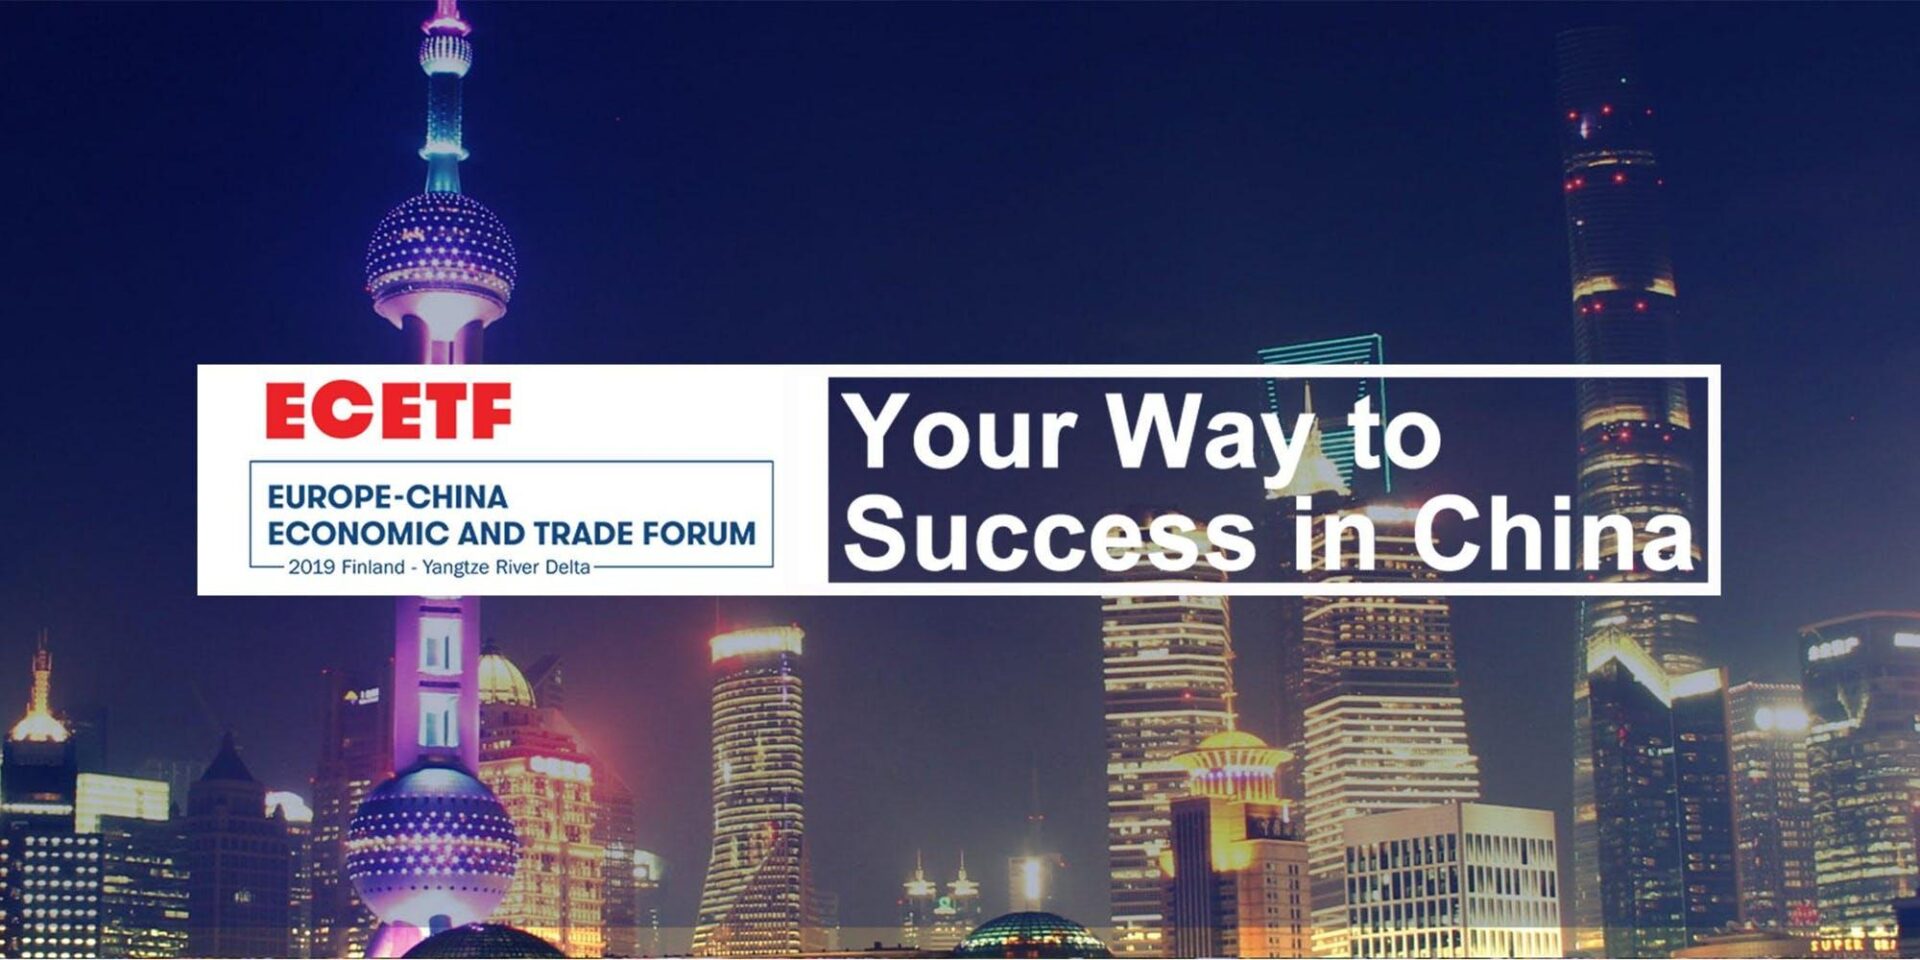 Europe-China Economic and Trade Forum event in Helsinki on April 9th 2019